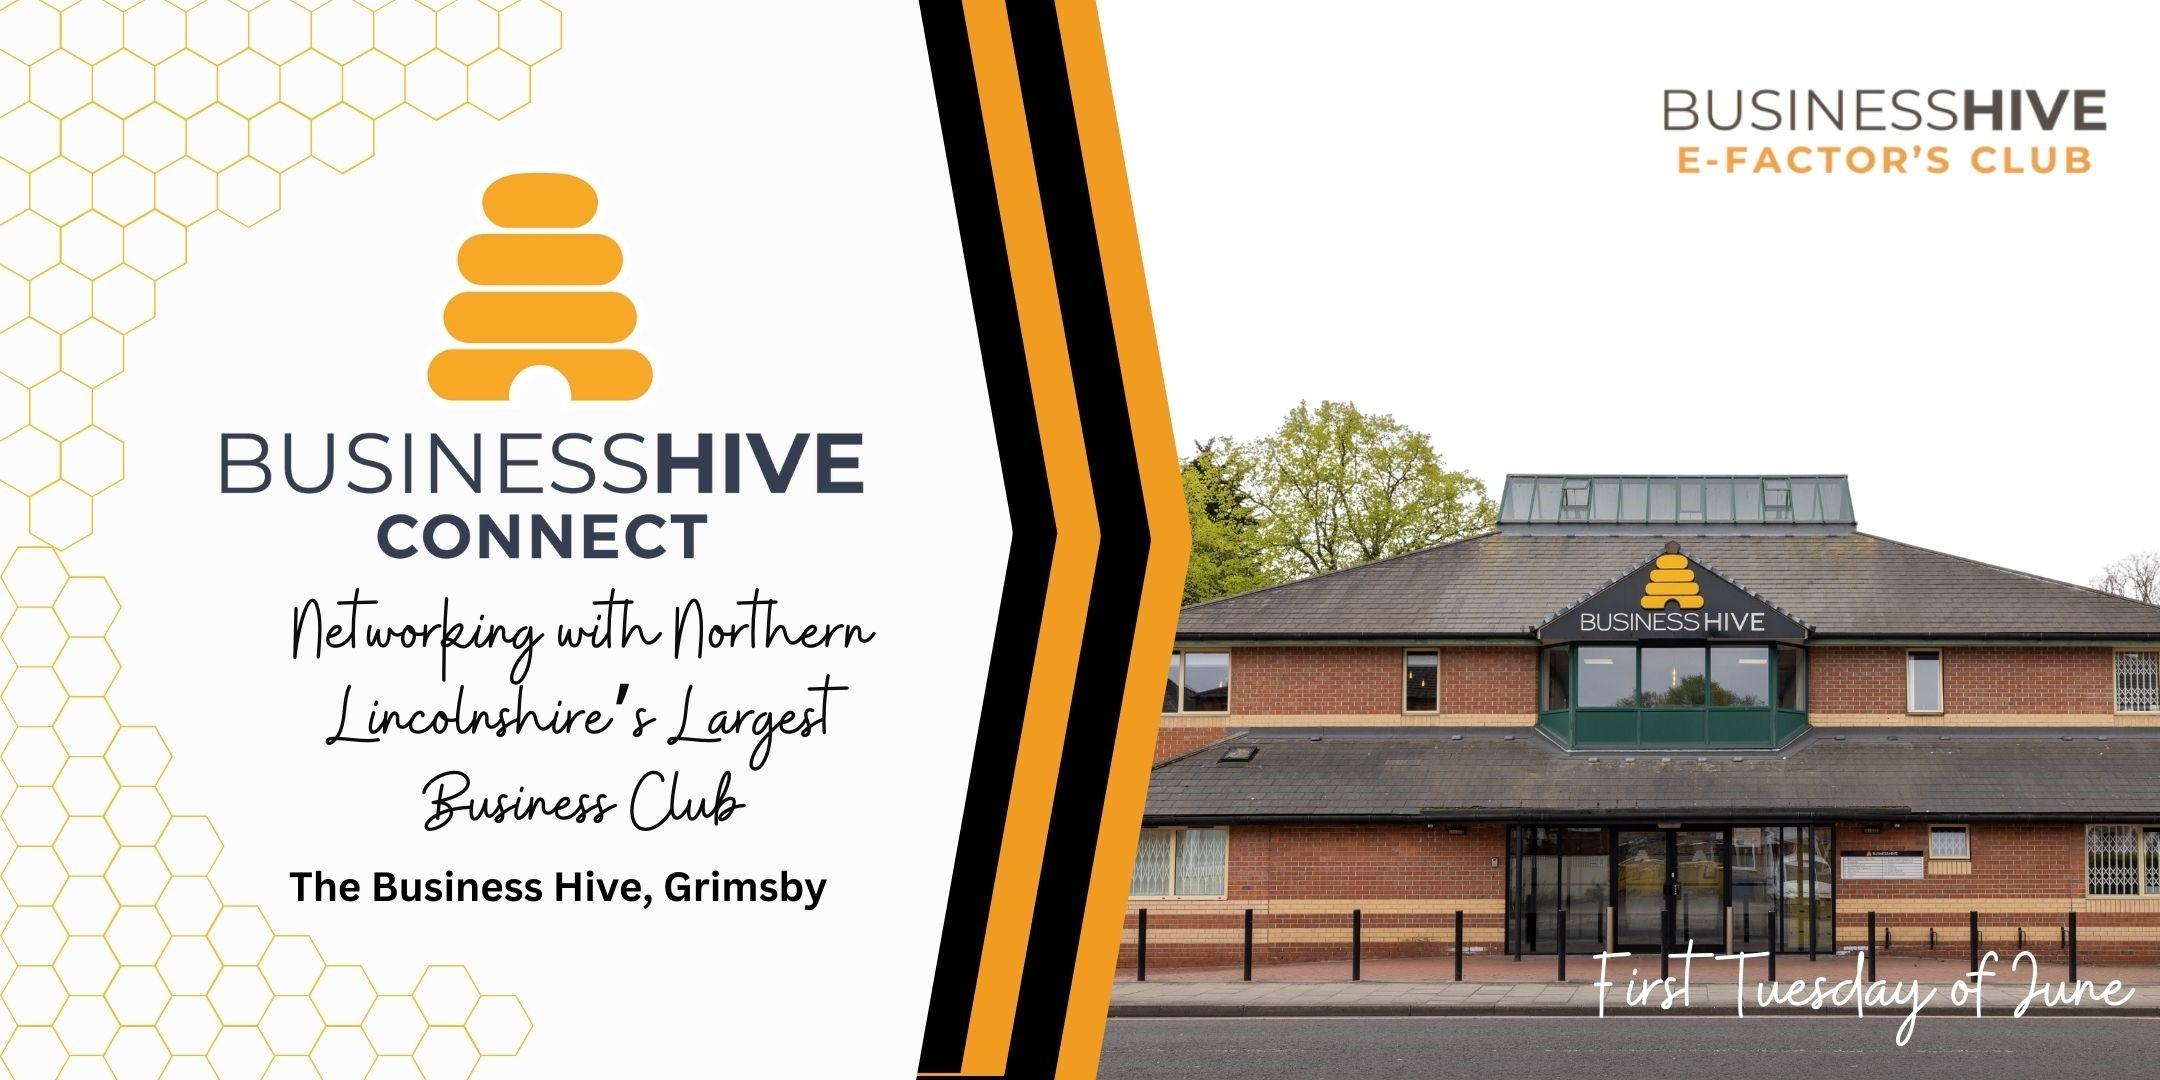 A promotional image for Business Hive Connect, Northern Lincolnshire’s largest business club's networking event at The Business Hive in Grimsby, held on the first weekday of June.